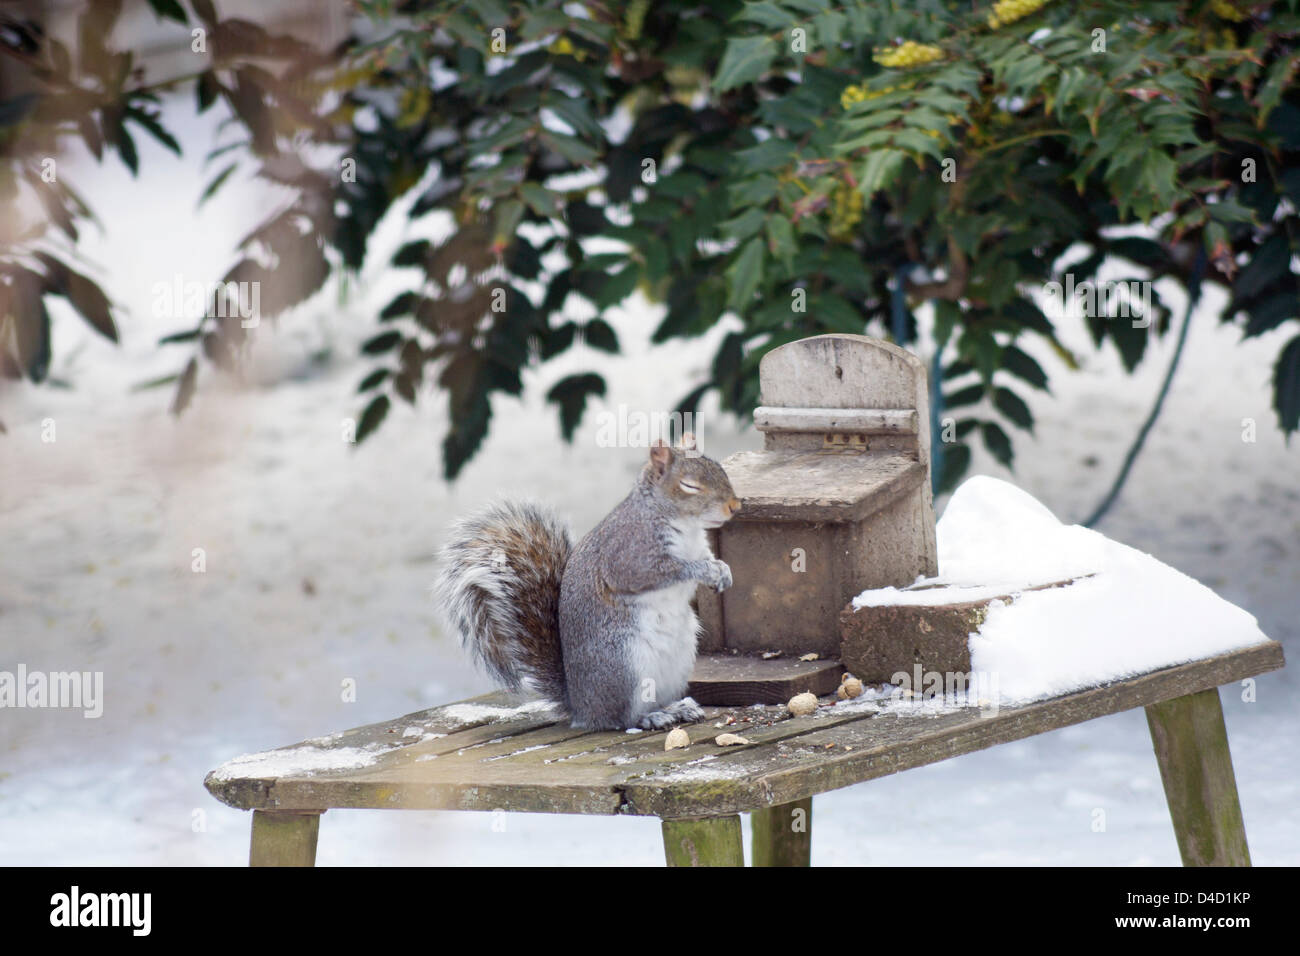 Worthing, Sussex, UK. 12th March 2013. Snow in the south east of England - Grey squirrel (sciurus carolinensis) in a snow covered wildlife friendly garden looking very cold & sorrowful.  Credit:  Libby Welch / Alamy Live News Stock Photo